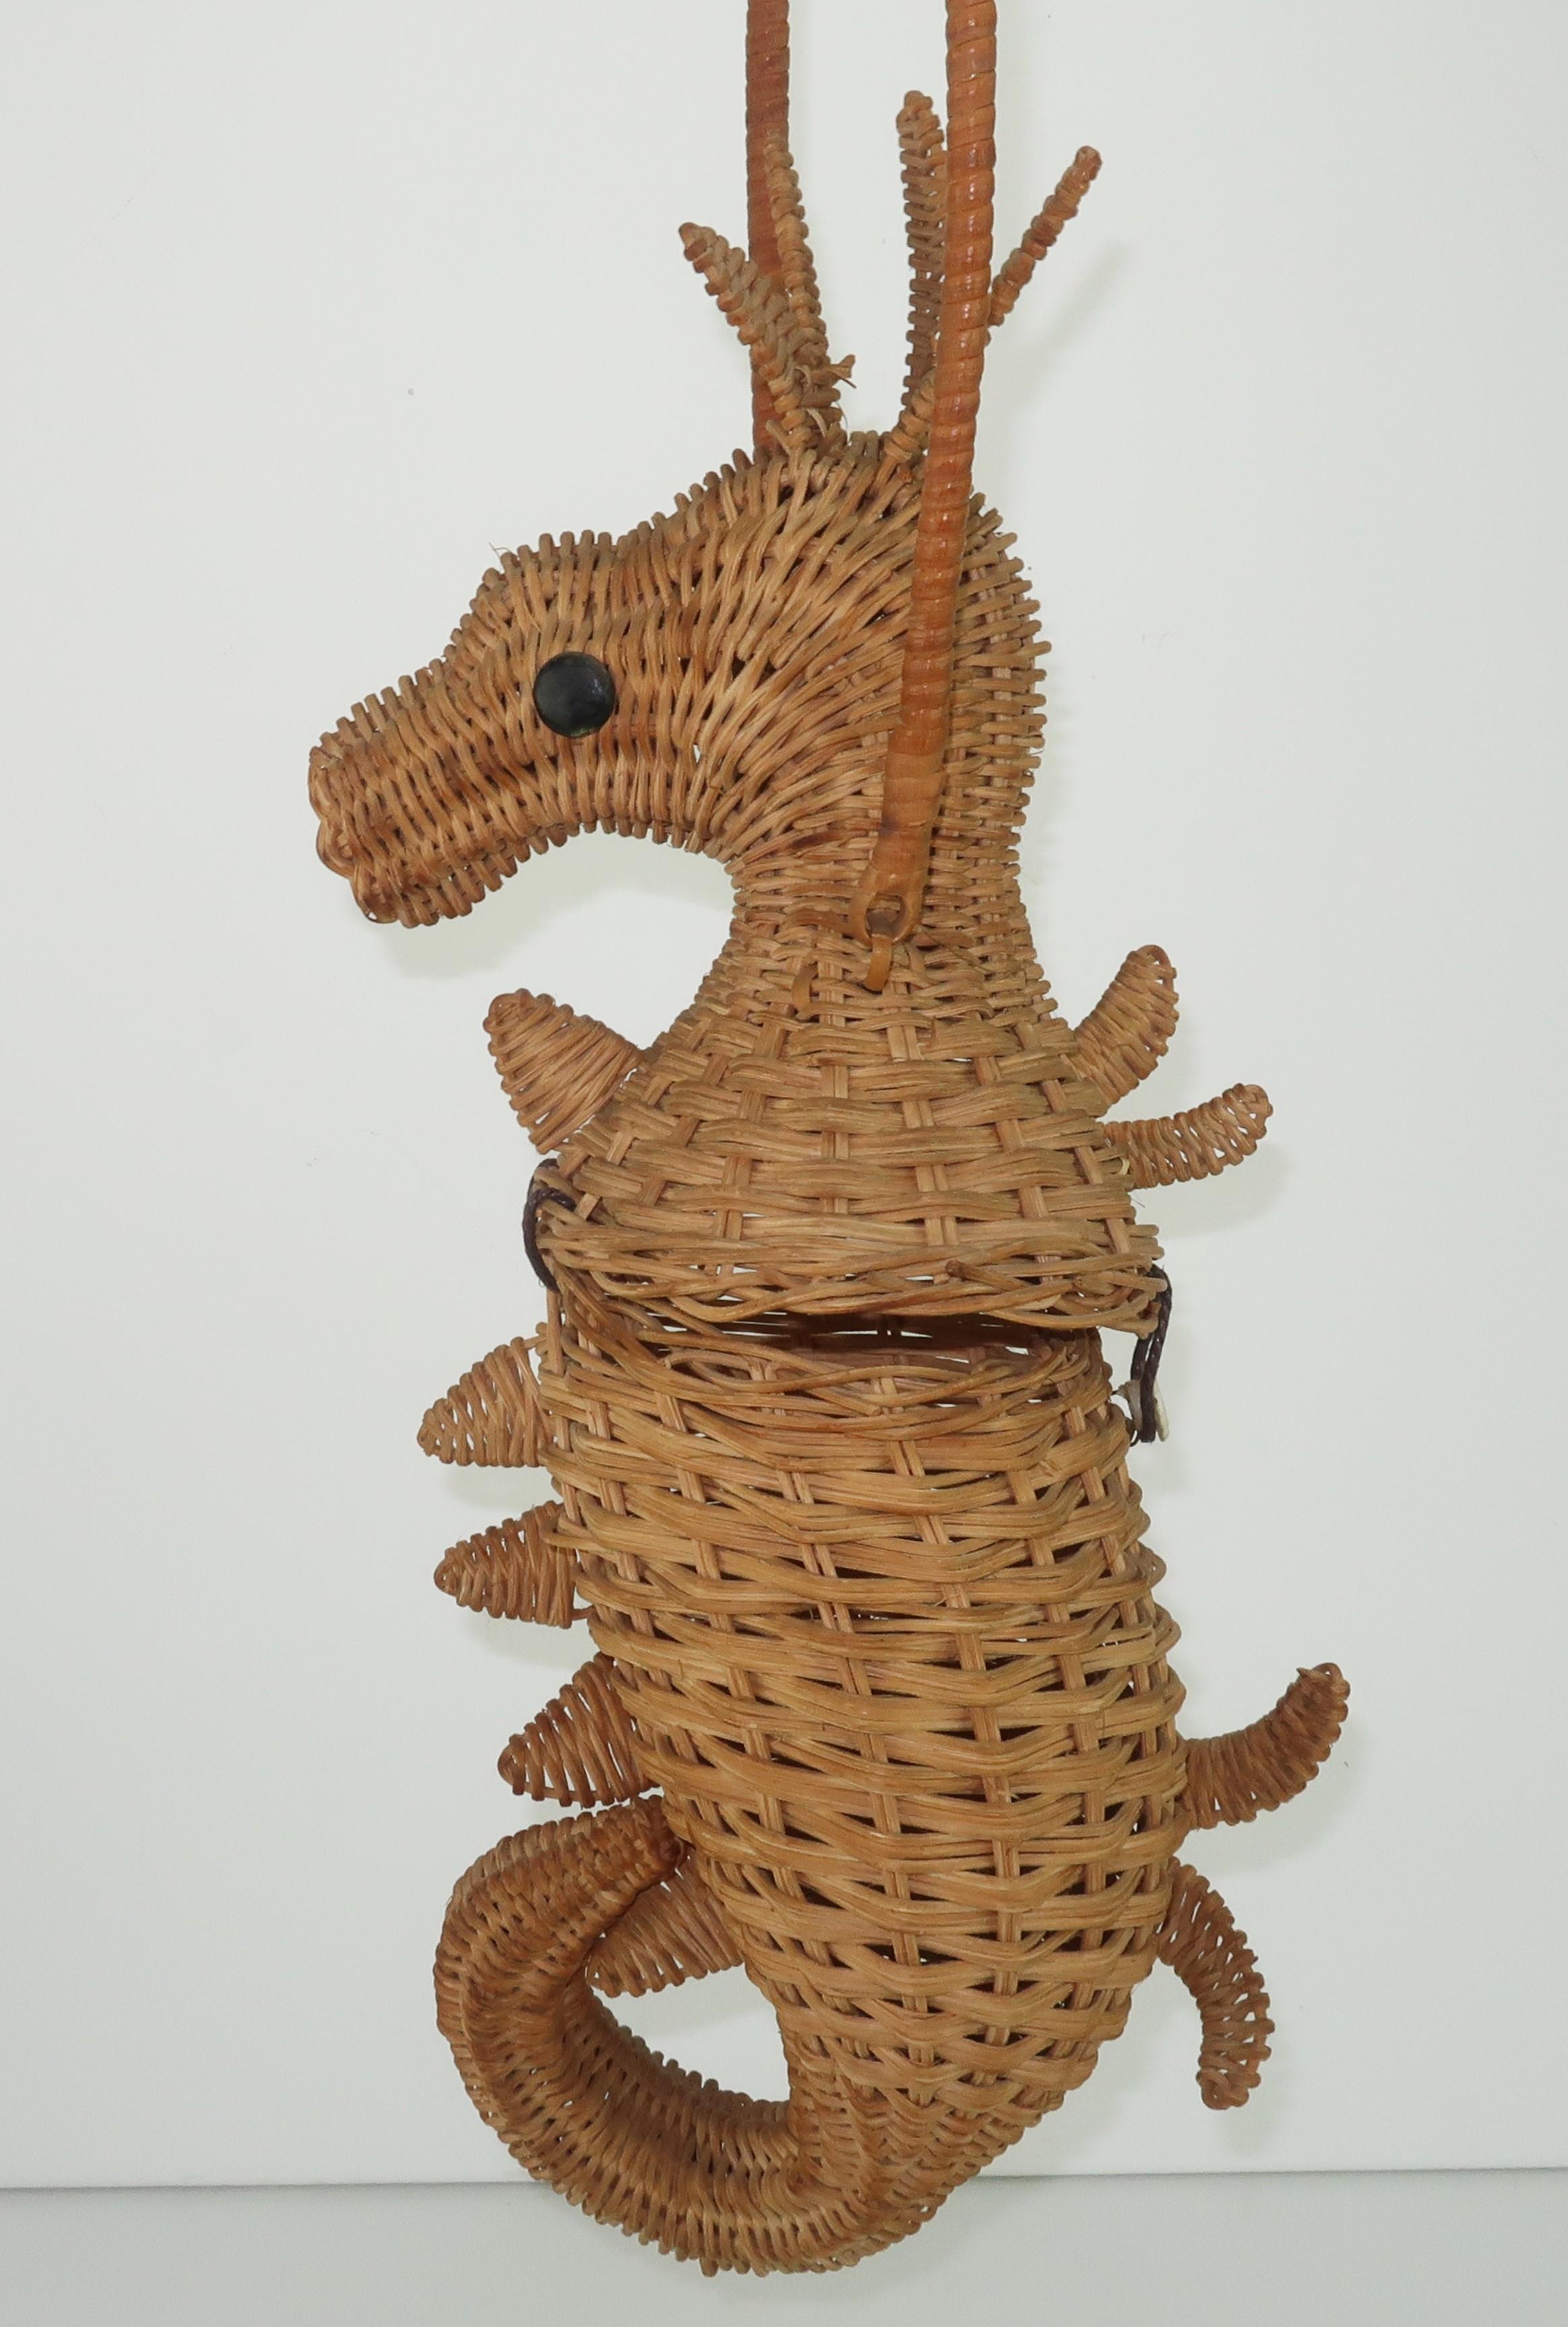 Adorable wicker seahorse handbag complete with fins, coronet, curled tail and black button eyes.  It sports a wicker handle and a button closure which opens to reveal a modest cone shaped interior.  Please note the Greta Plattry crochet two piece